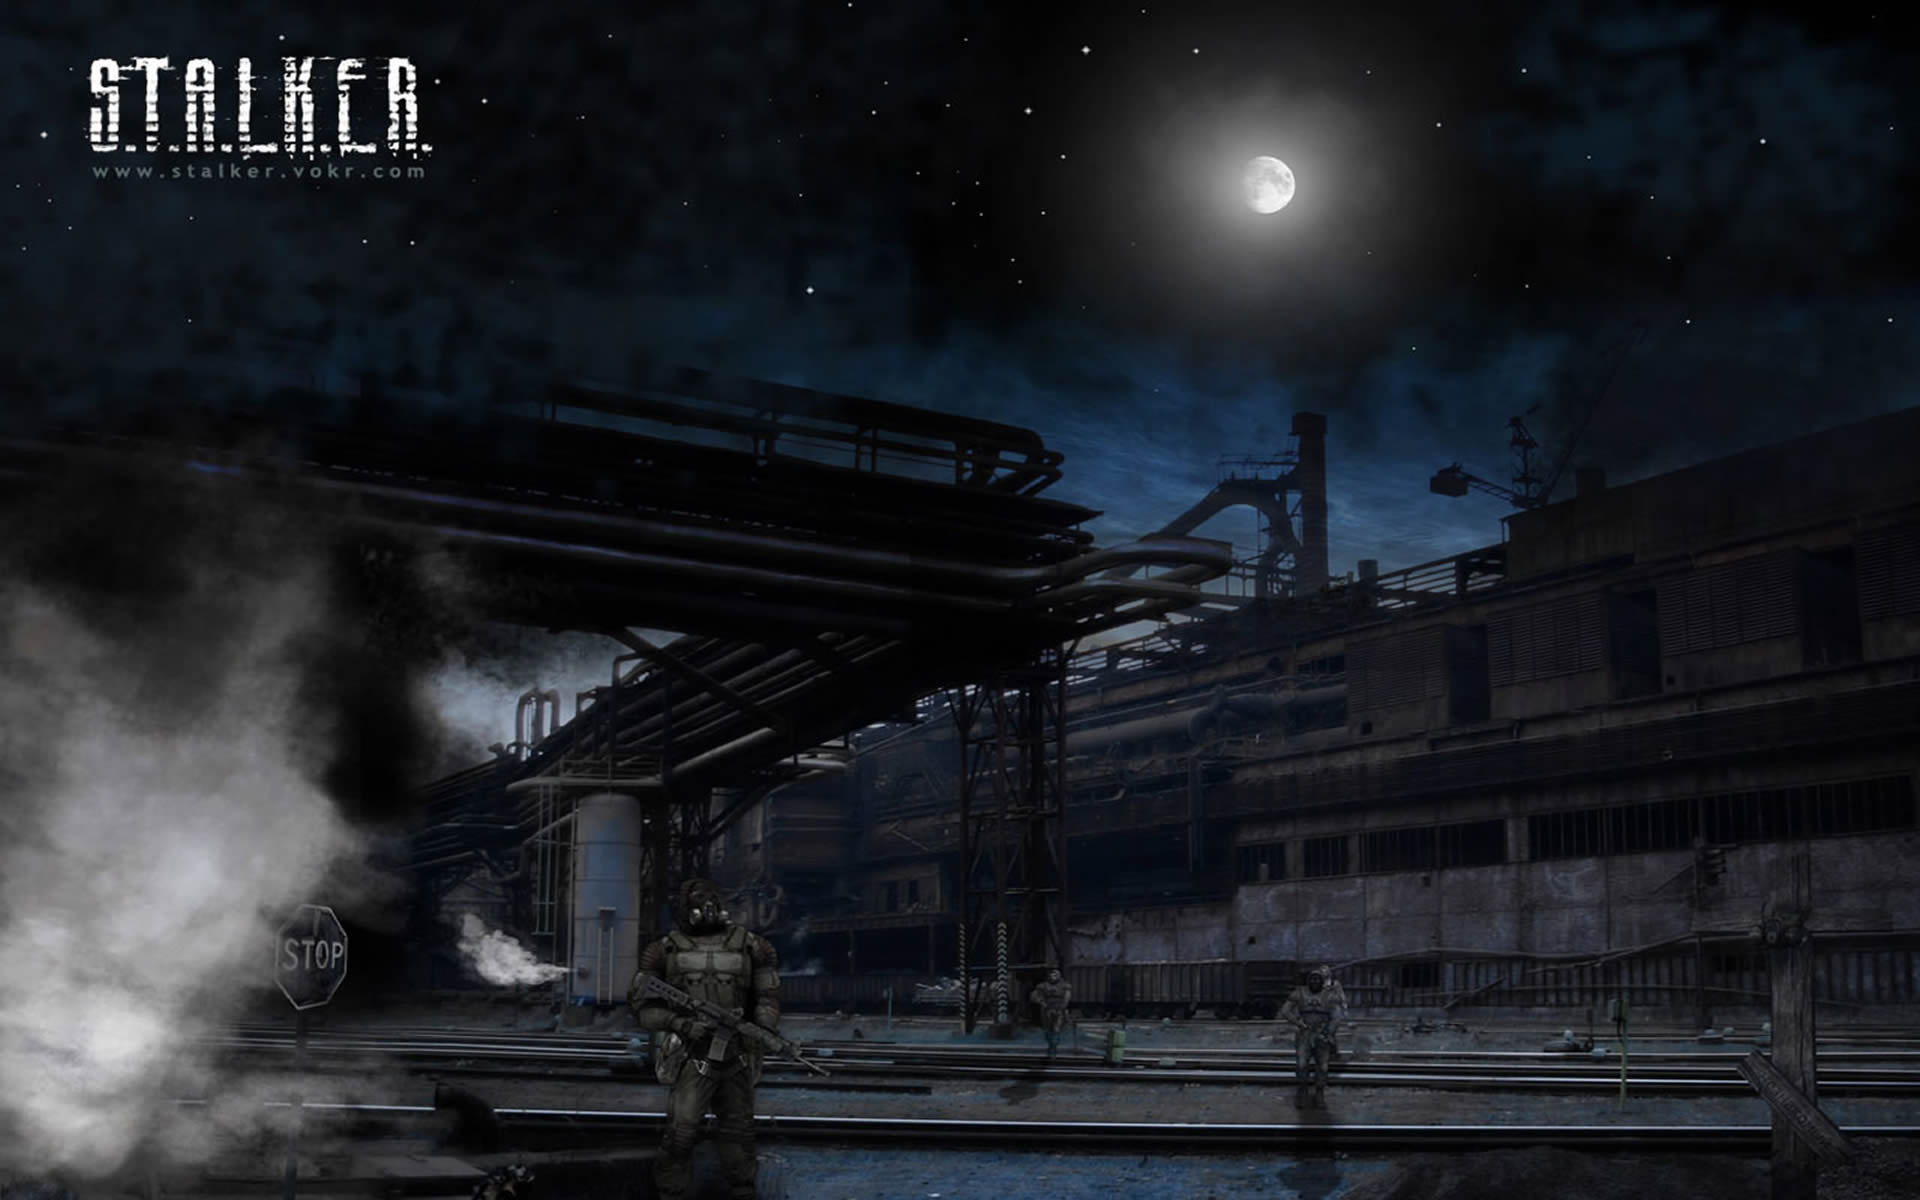 At The Factory Action Rpg Games Wallpaper Image Featuring Stalker